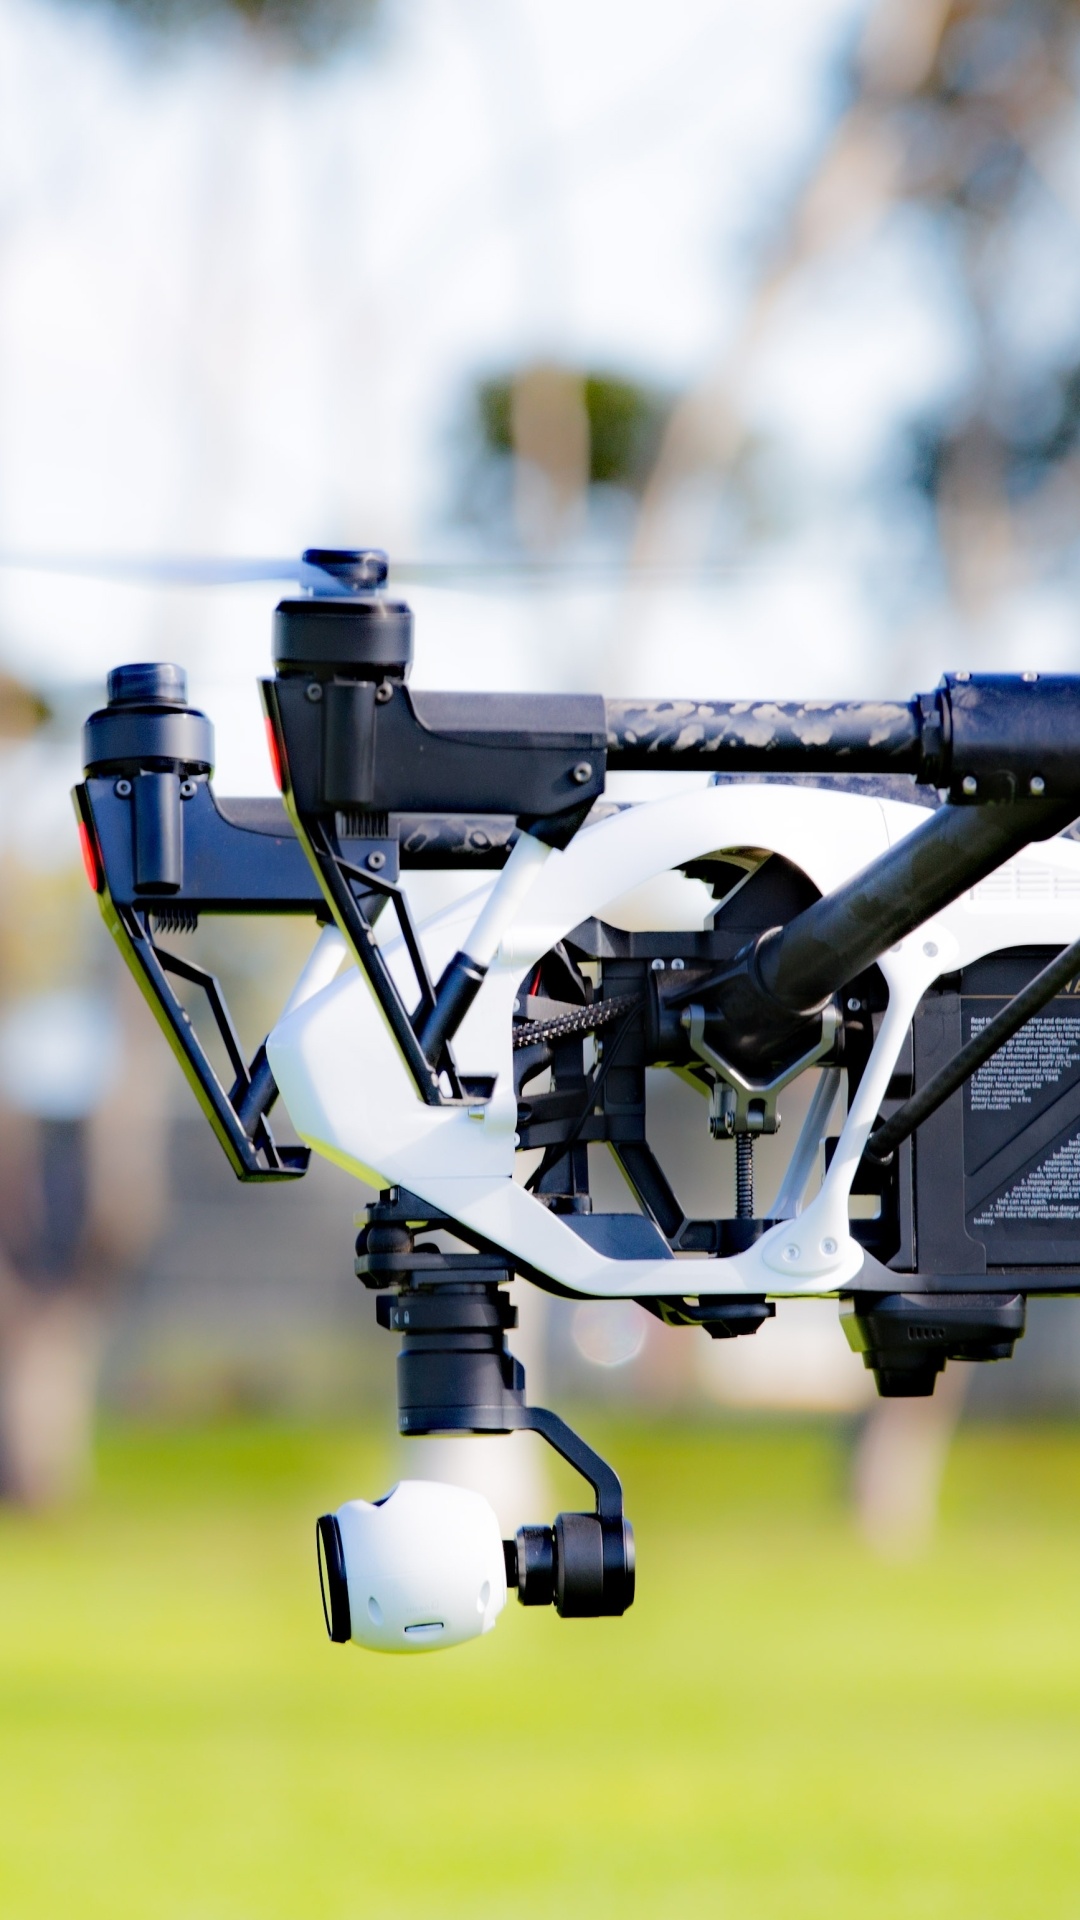 Drone: A remote control quadcopter-type model helicopter, Remotely-piloted aircraft. 1080x1920 Full HD Background.